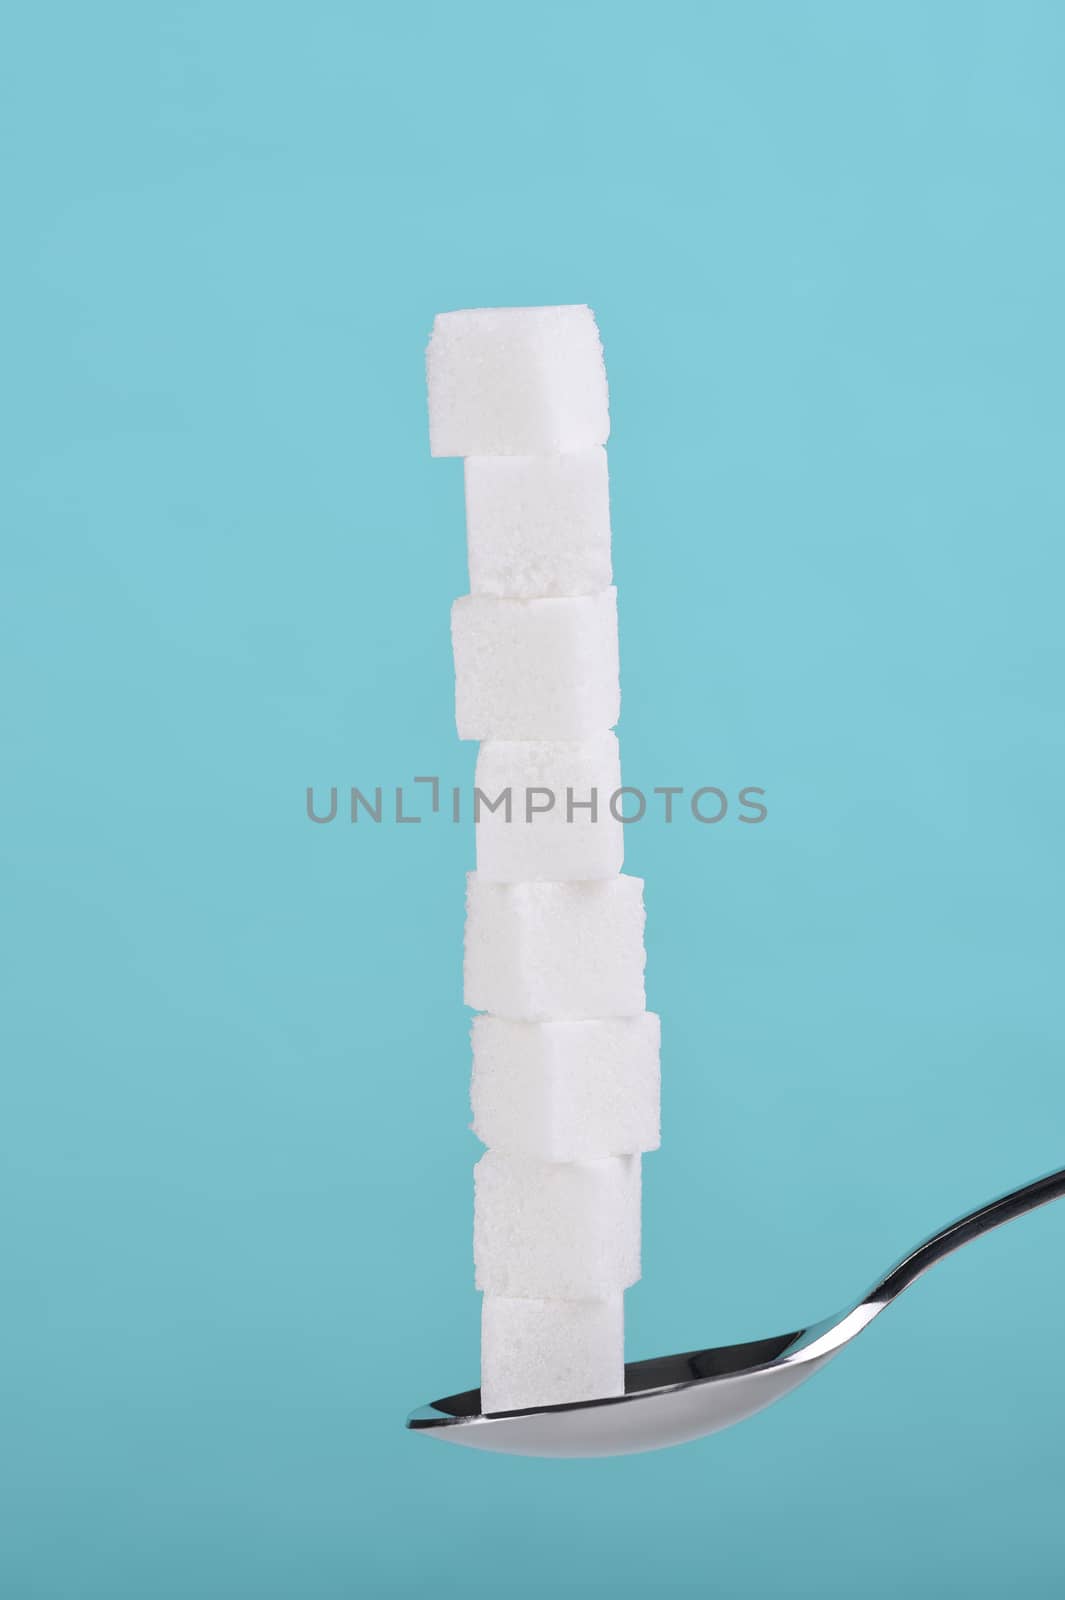 Closeup of several sugar cubes stacked on a spoon against a teal background.